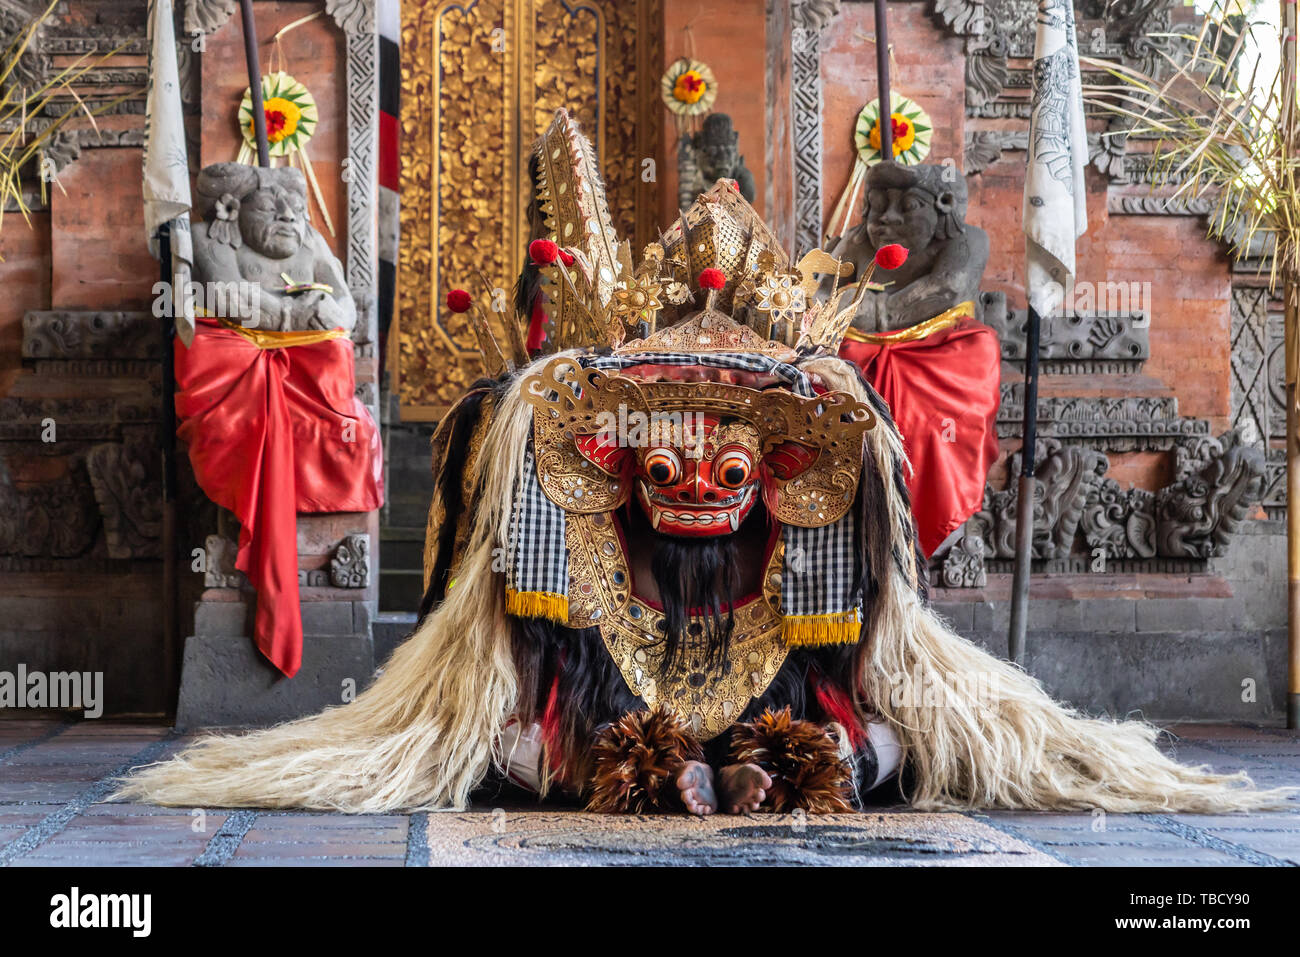 Banjar Gelulung, Bali, Indonesia - February 26, 2019: Mas Village. Play on stage setting. Dragon rises from the floor. Colorful mask with yellow, red, Stock Photo